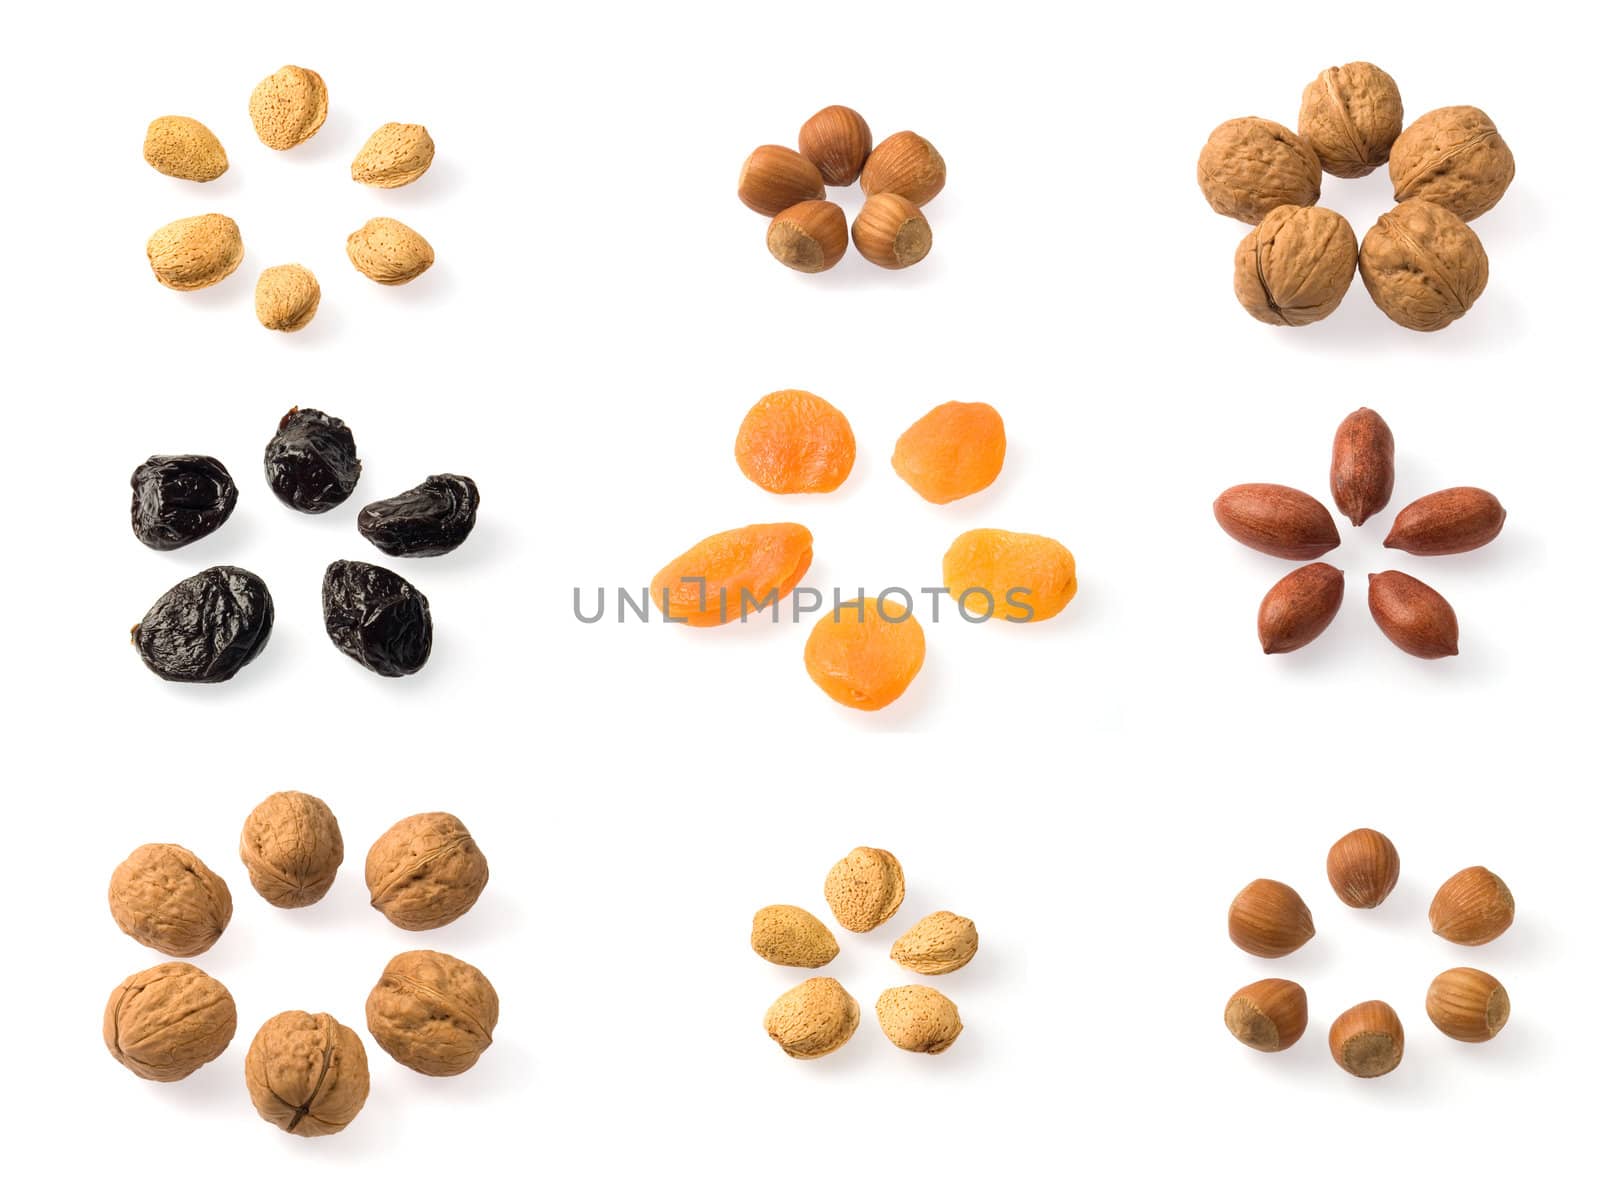 Whole dried fruits collection over white. Includes almonds, hazelnuts, pecans, walnuts, prunes and dried apricots. Includes almonds, hazelnuts, pecans, walnuts, prunes and dried apricots.